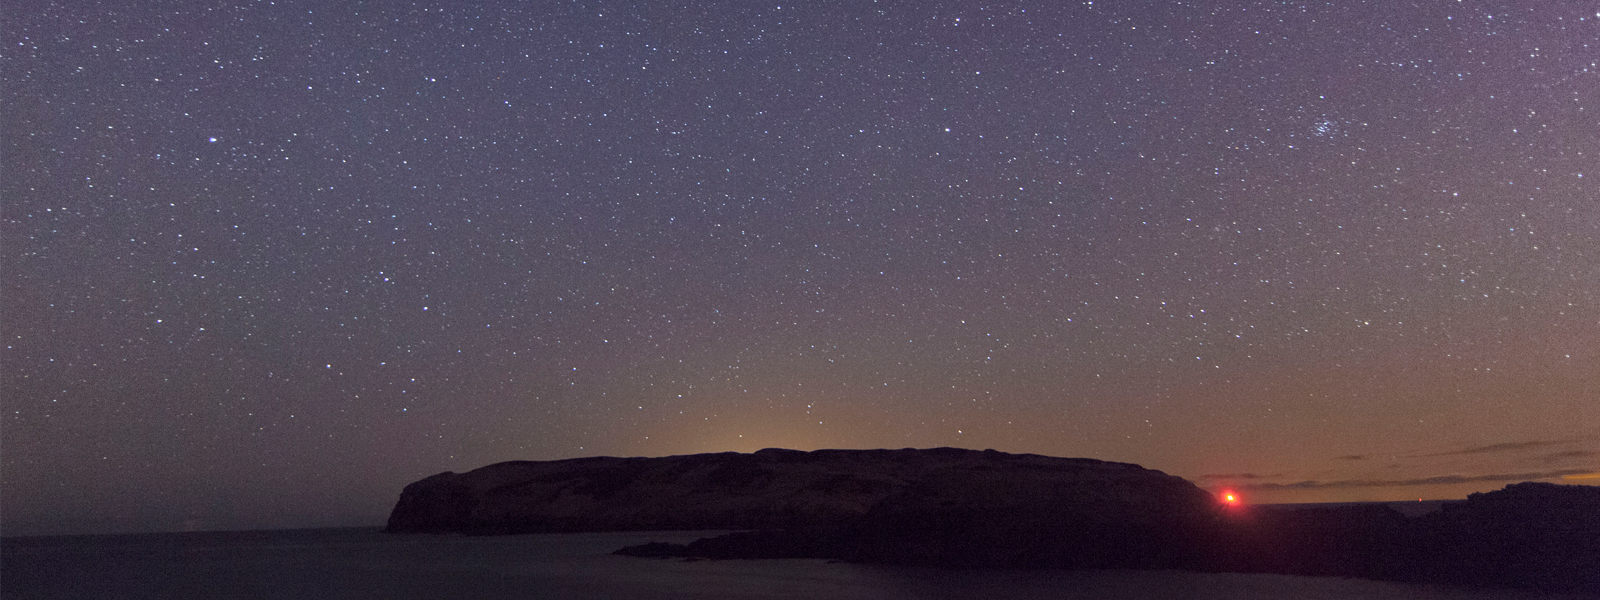 The starry skies over the Sound, a stargazing site in the south of the Isle of Man